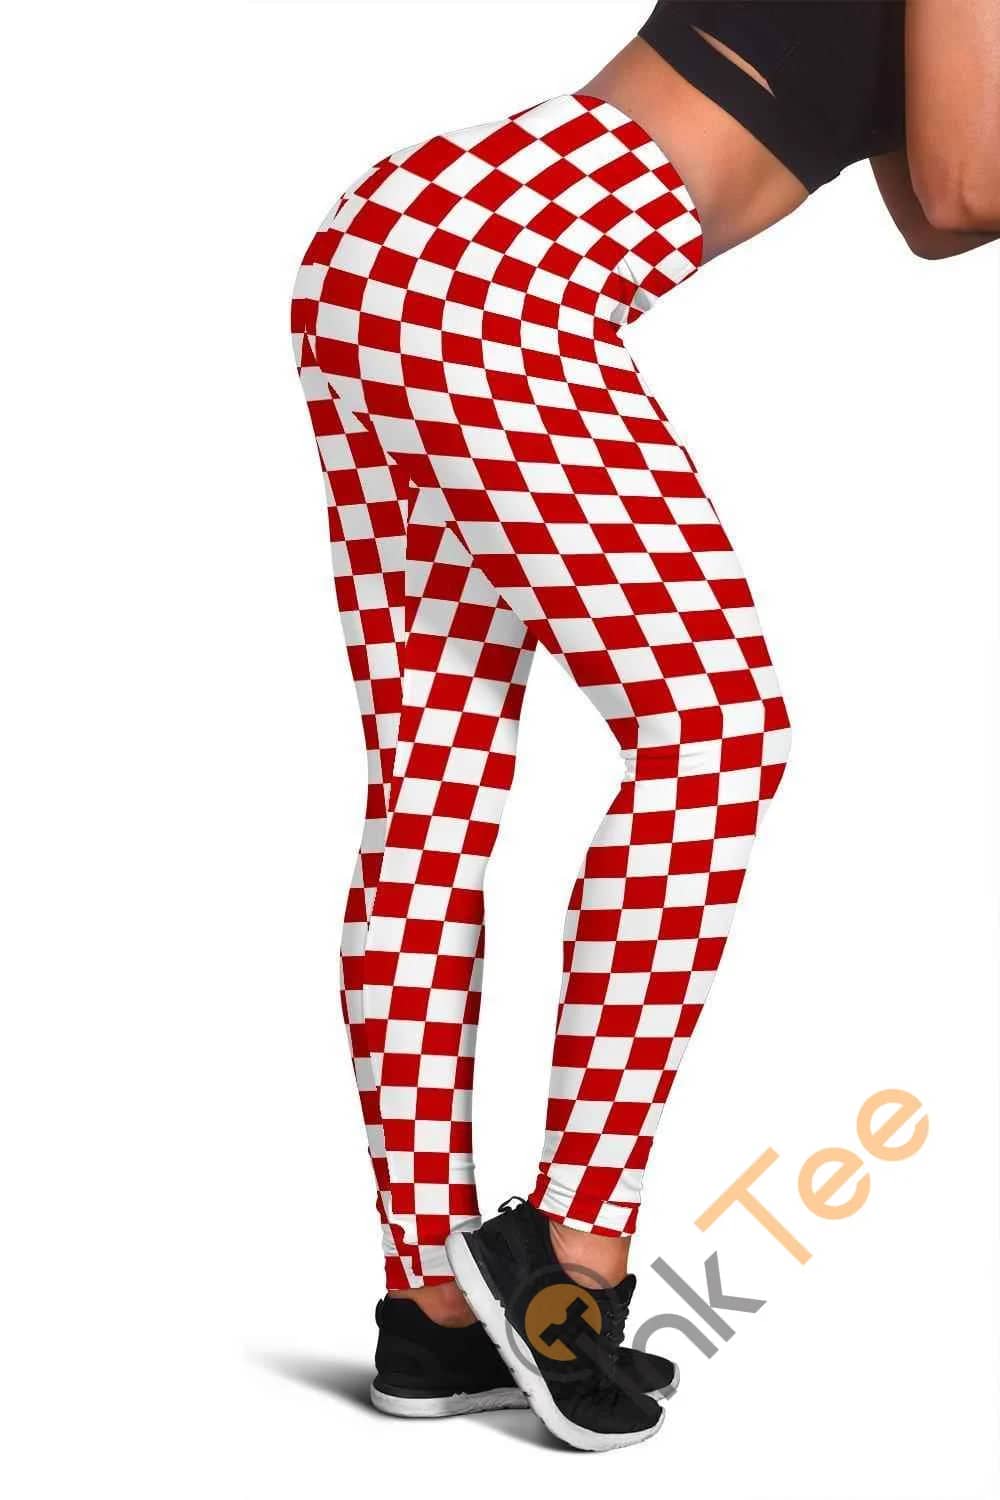 Nc State Wolfpack Fan Inspired 3D All Over Print For Yoga Fitness Checkers Women'S Leggings